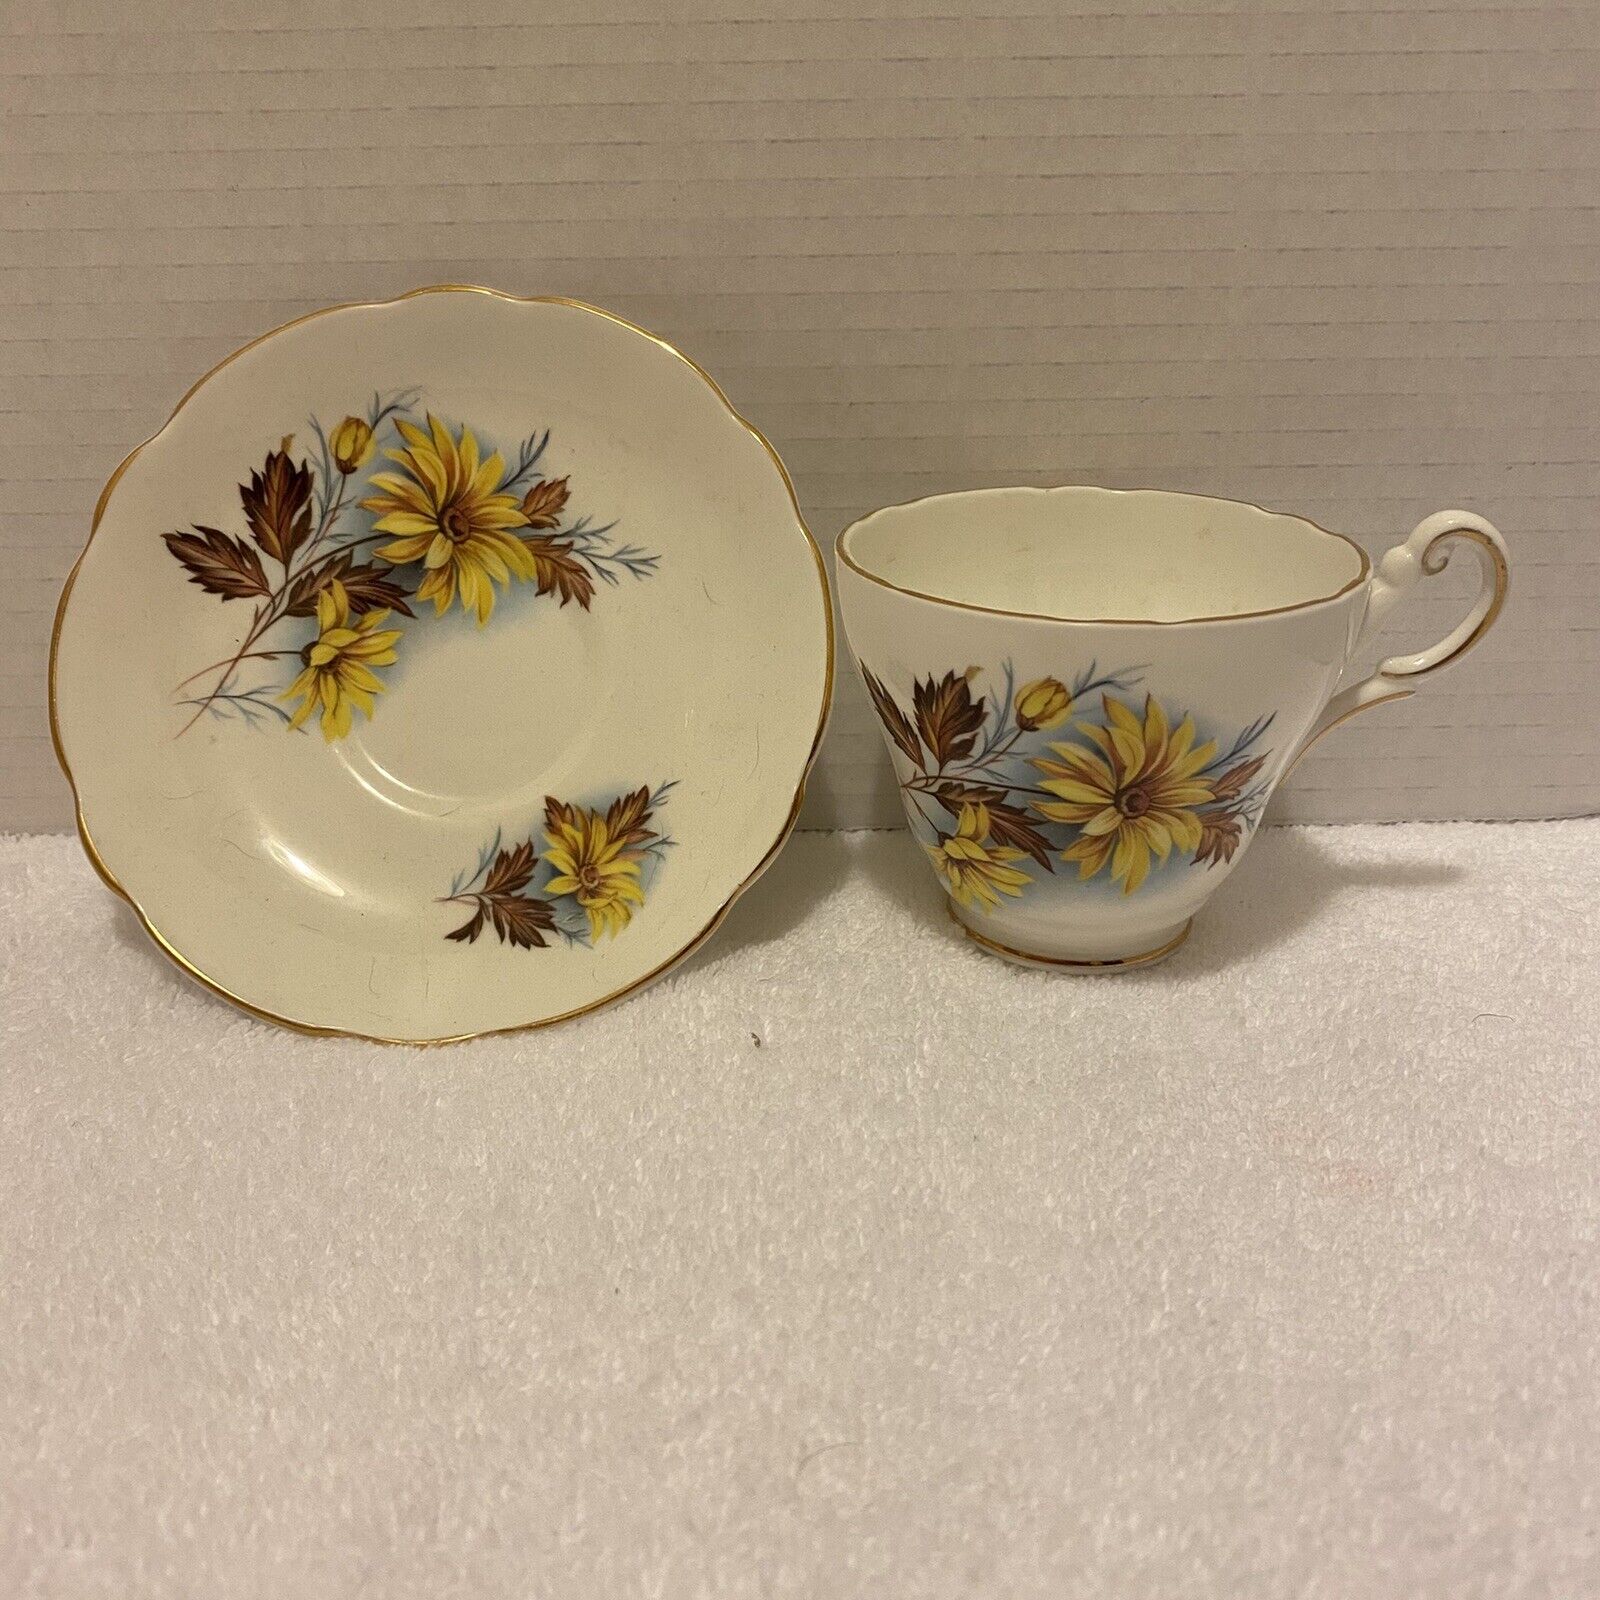 Vintage Daisy Tea Cup and Saucer Regency Bone China From England